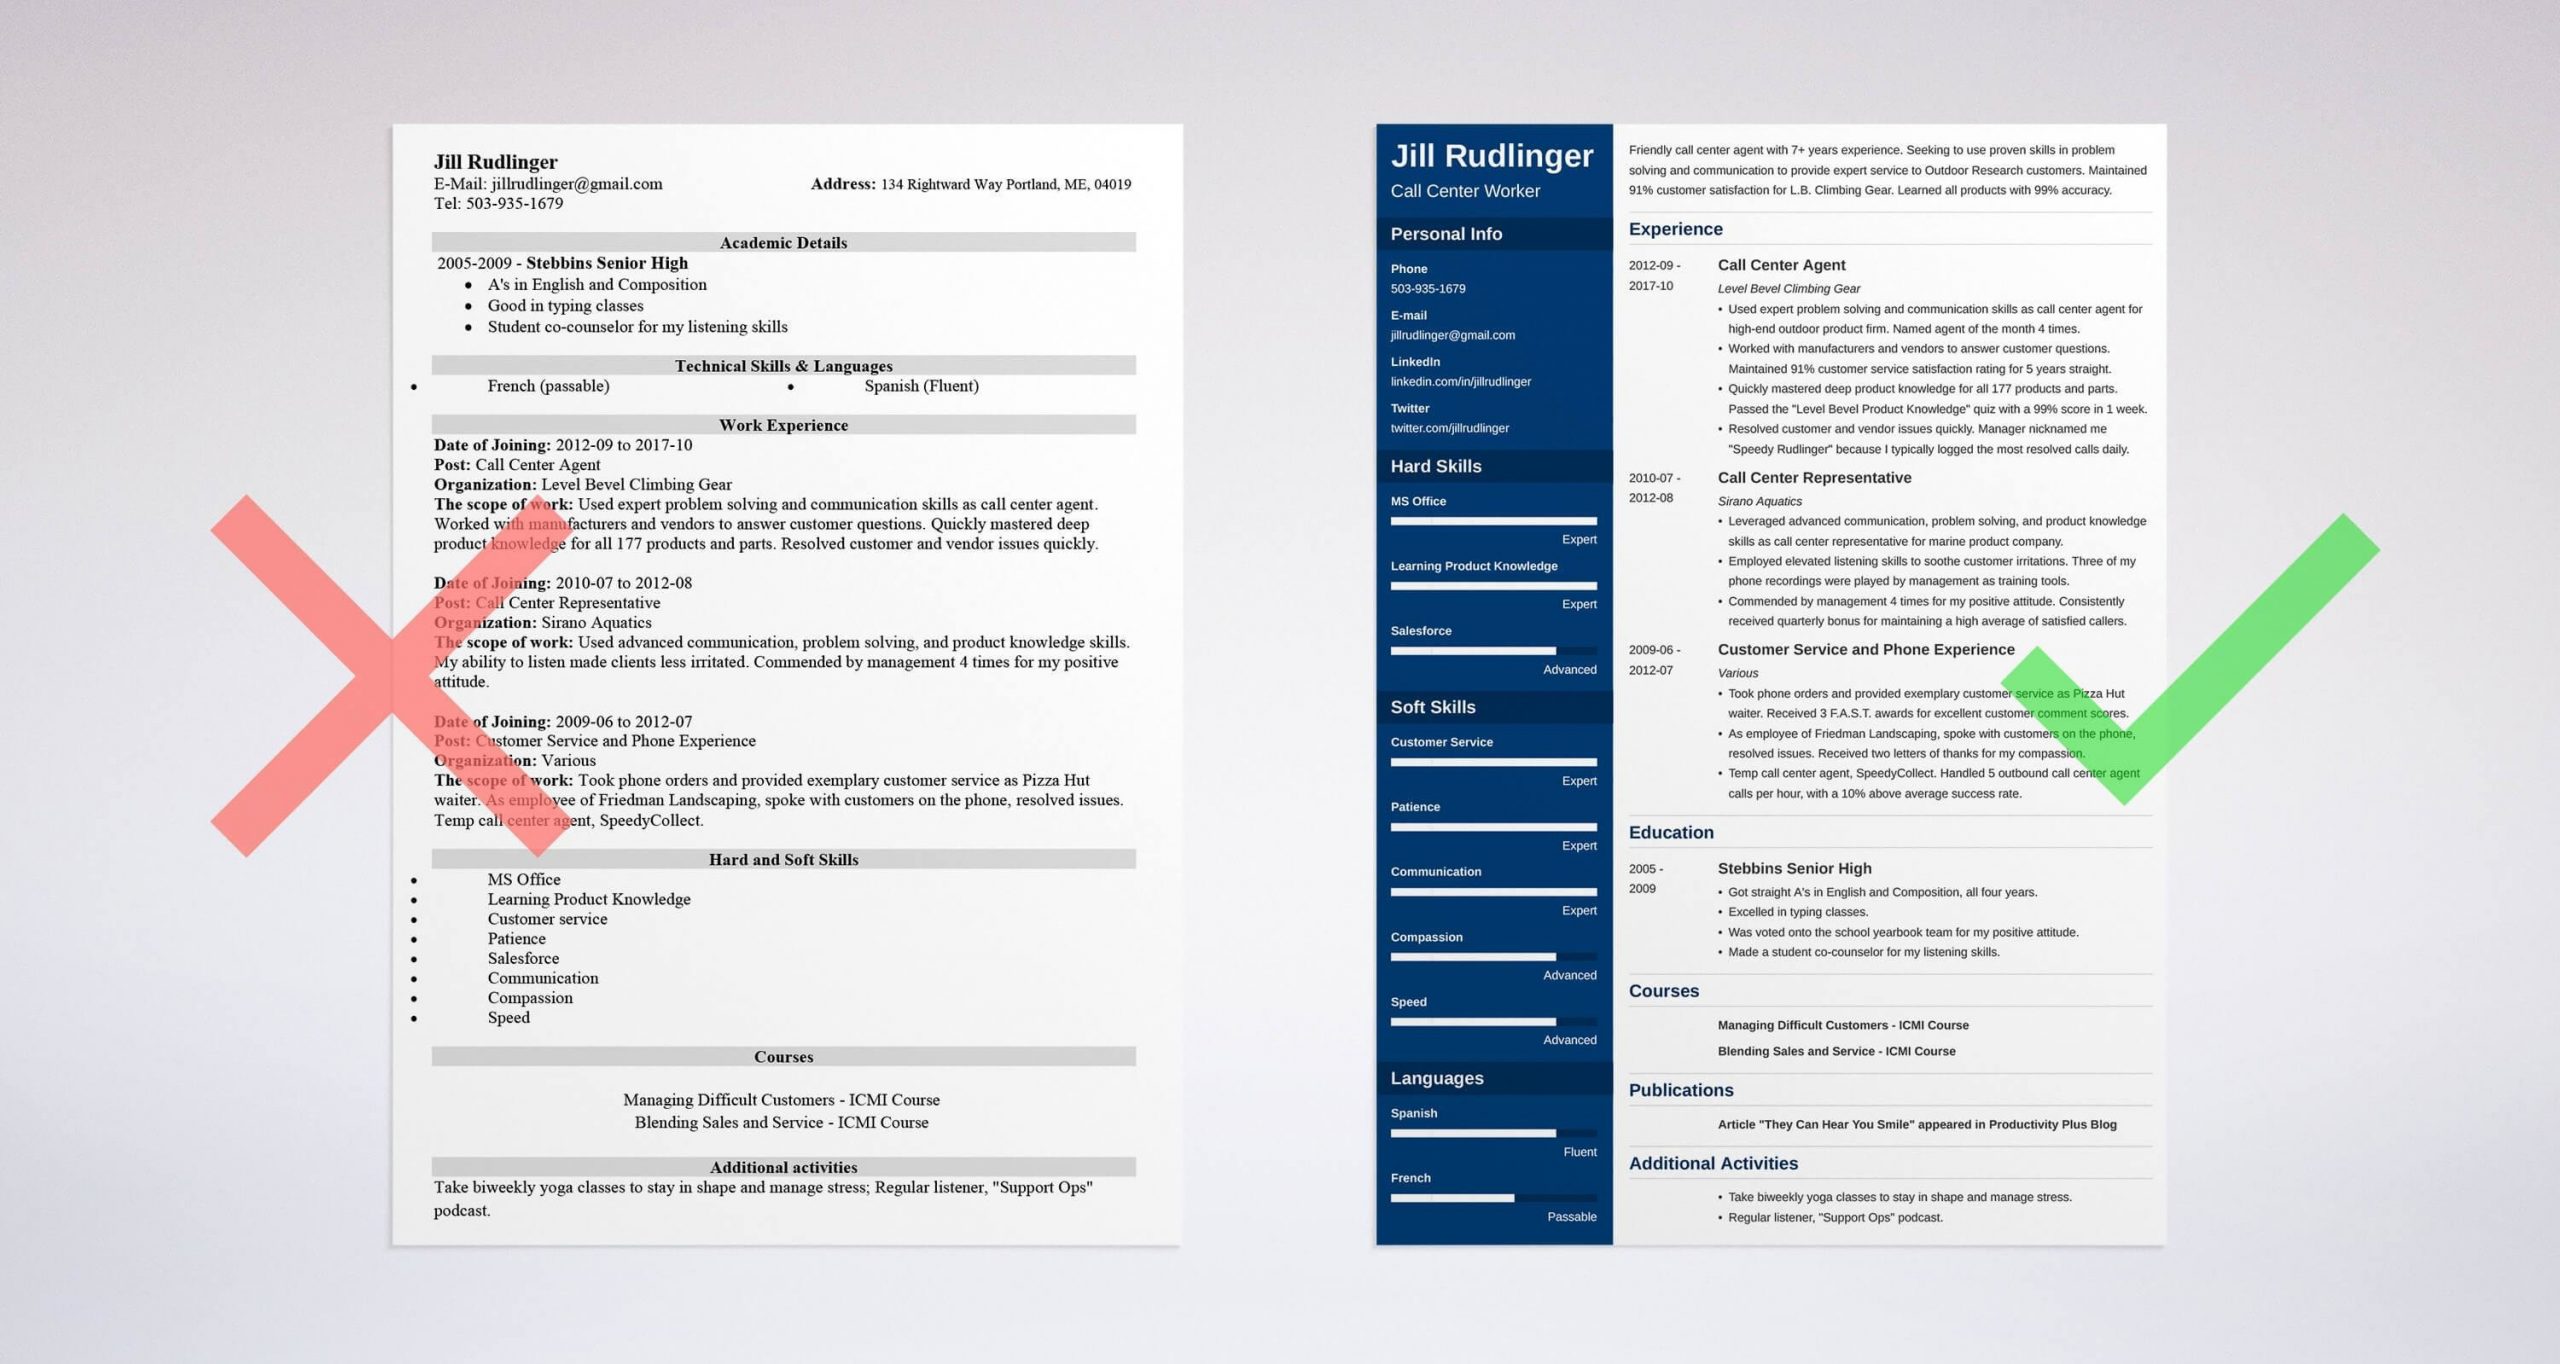 call center resume example